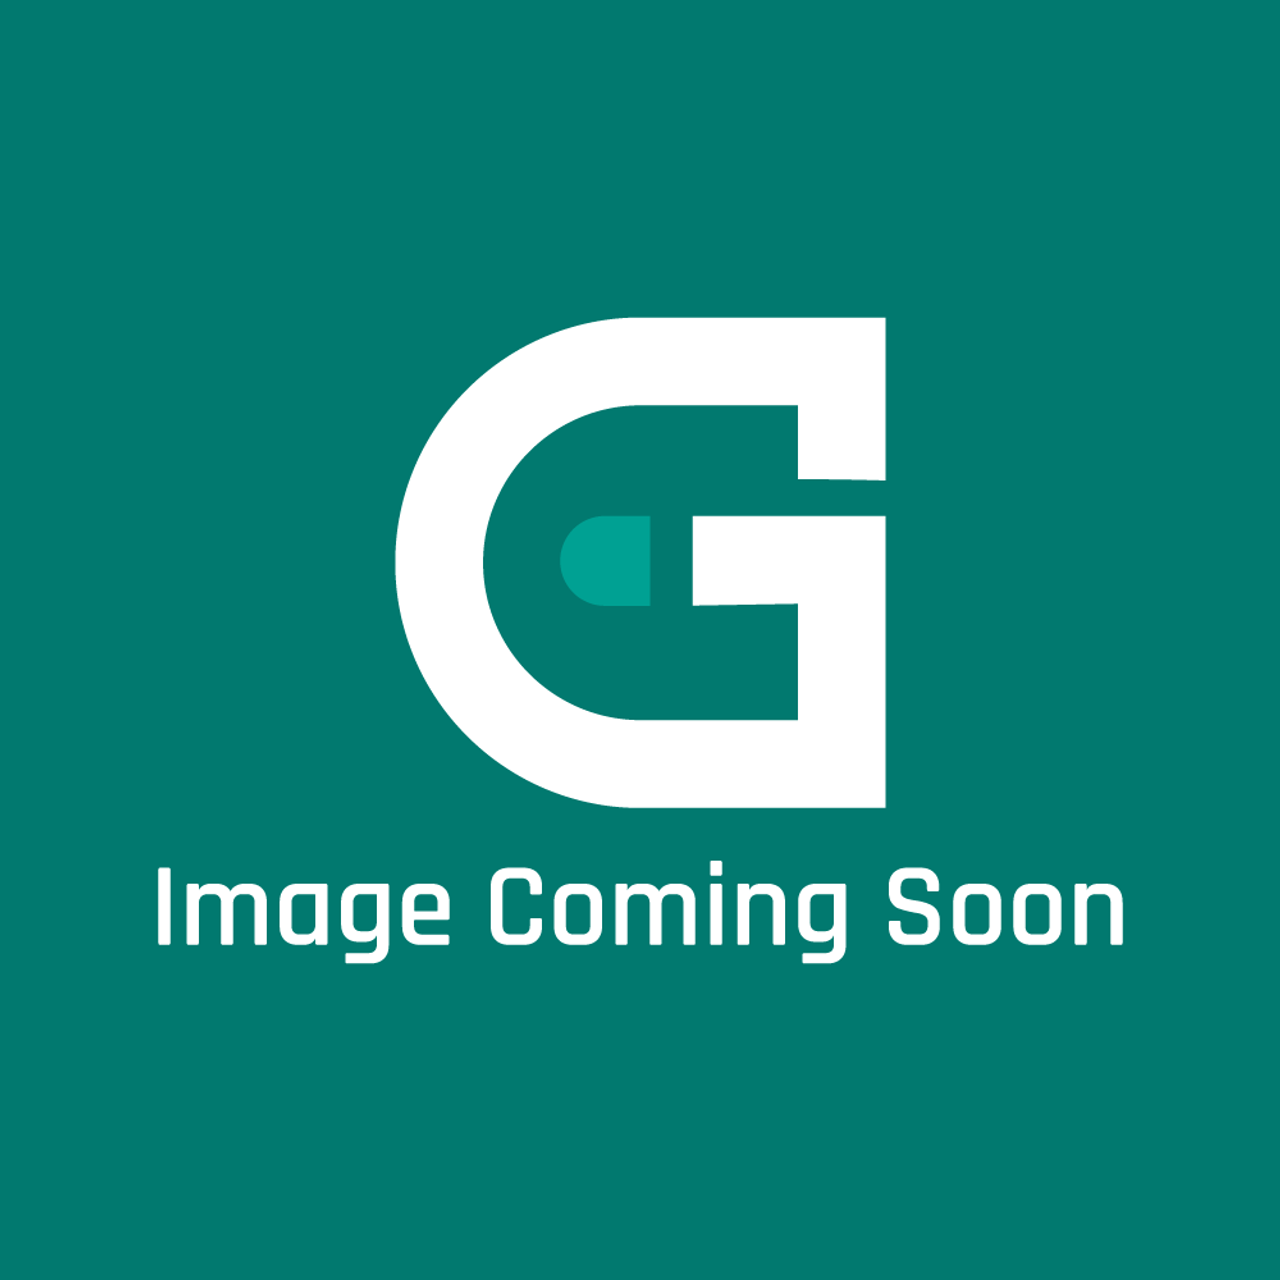 Garland CK4527194 - Fan Cover Mount Assy - Image Coming Soon!